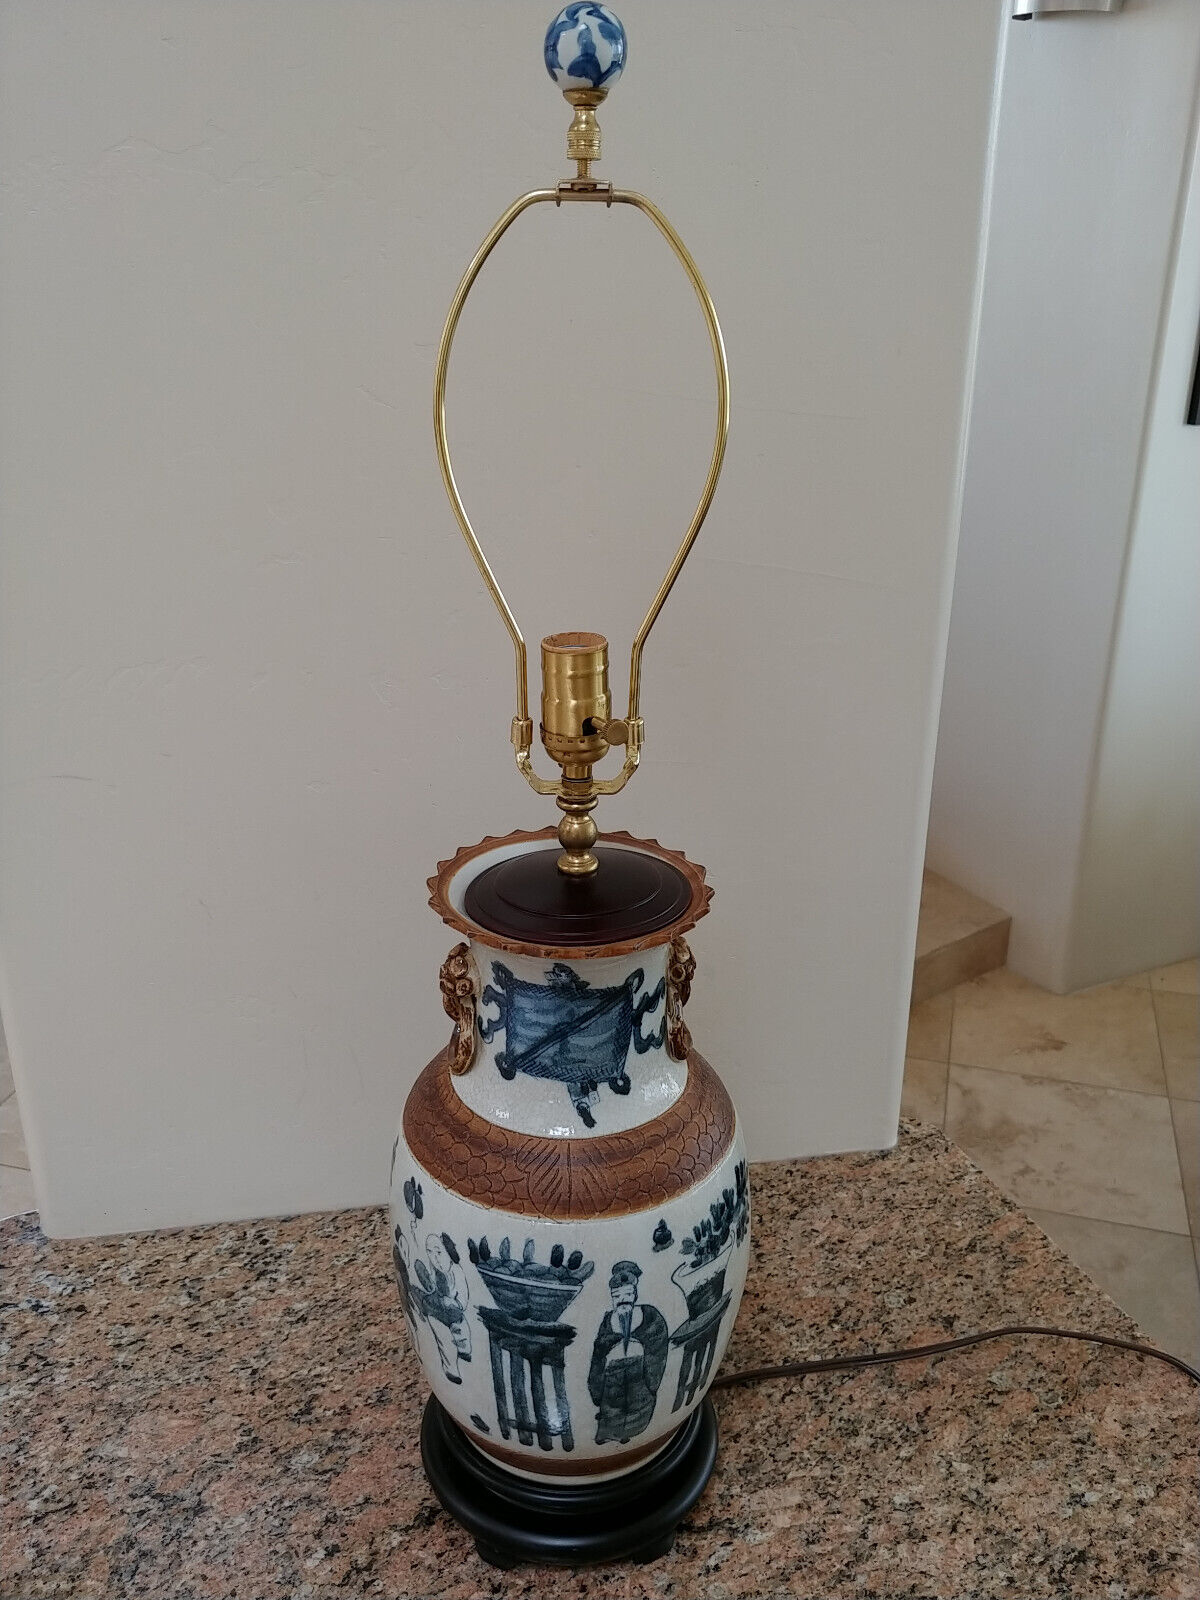 Antique Chinese Off-White and Blue Figurative Table Lamp